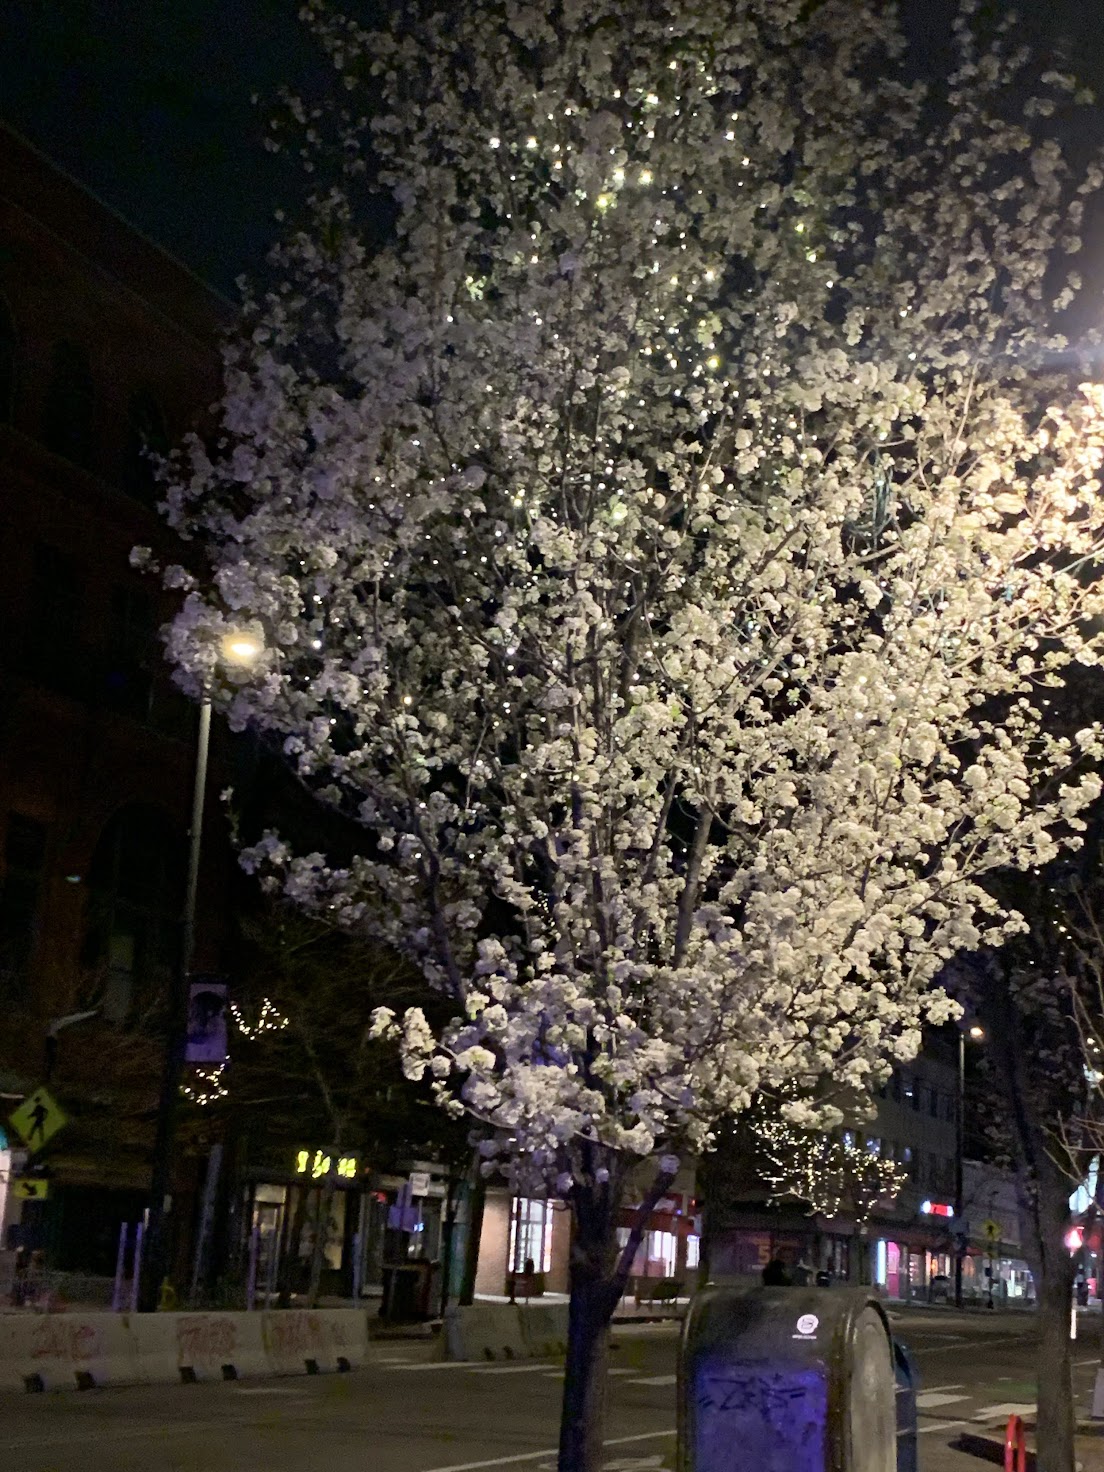 Mass Ave as I remember it at night, lights shining on flowered trees.